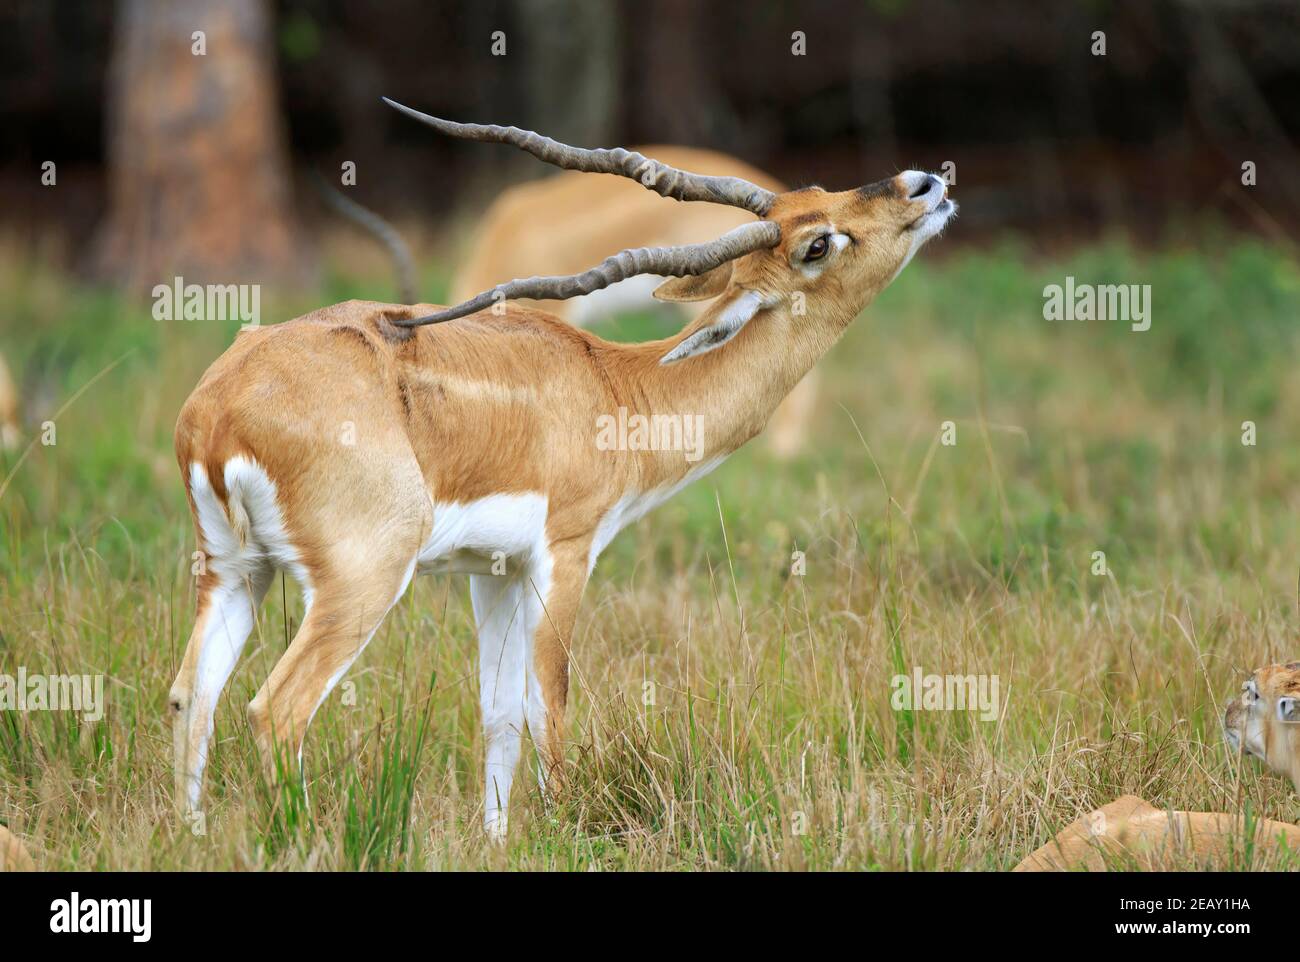 Blackbuck, Antilope cervicapra. A young male scratches itself with its long sprial horns. Stock Photo